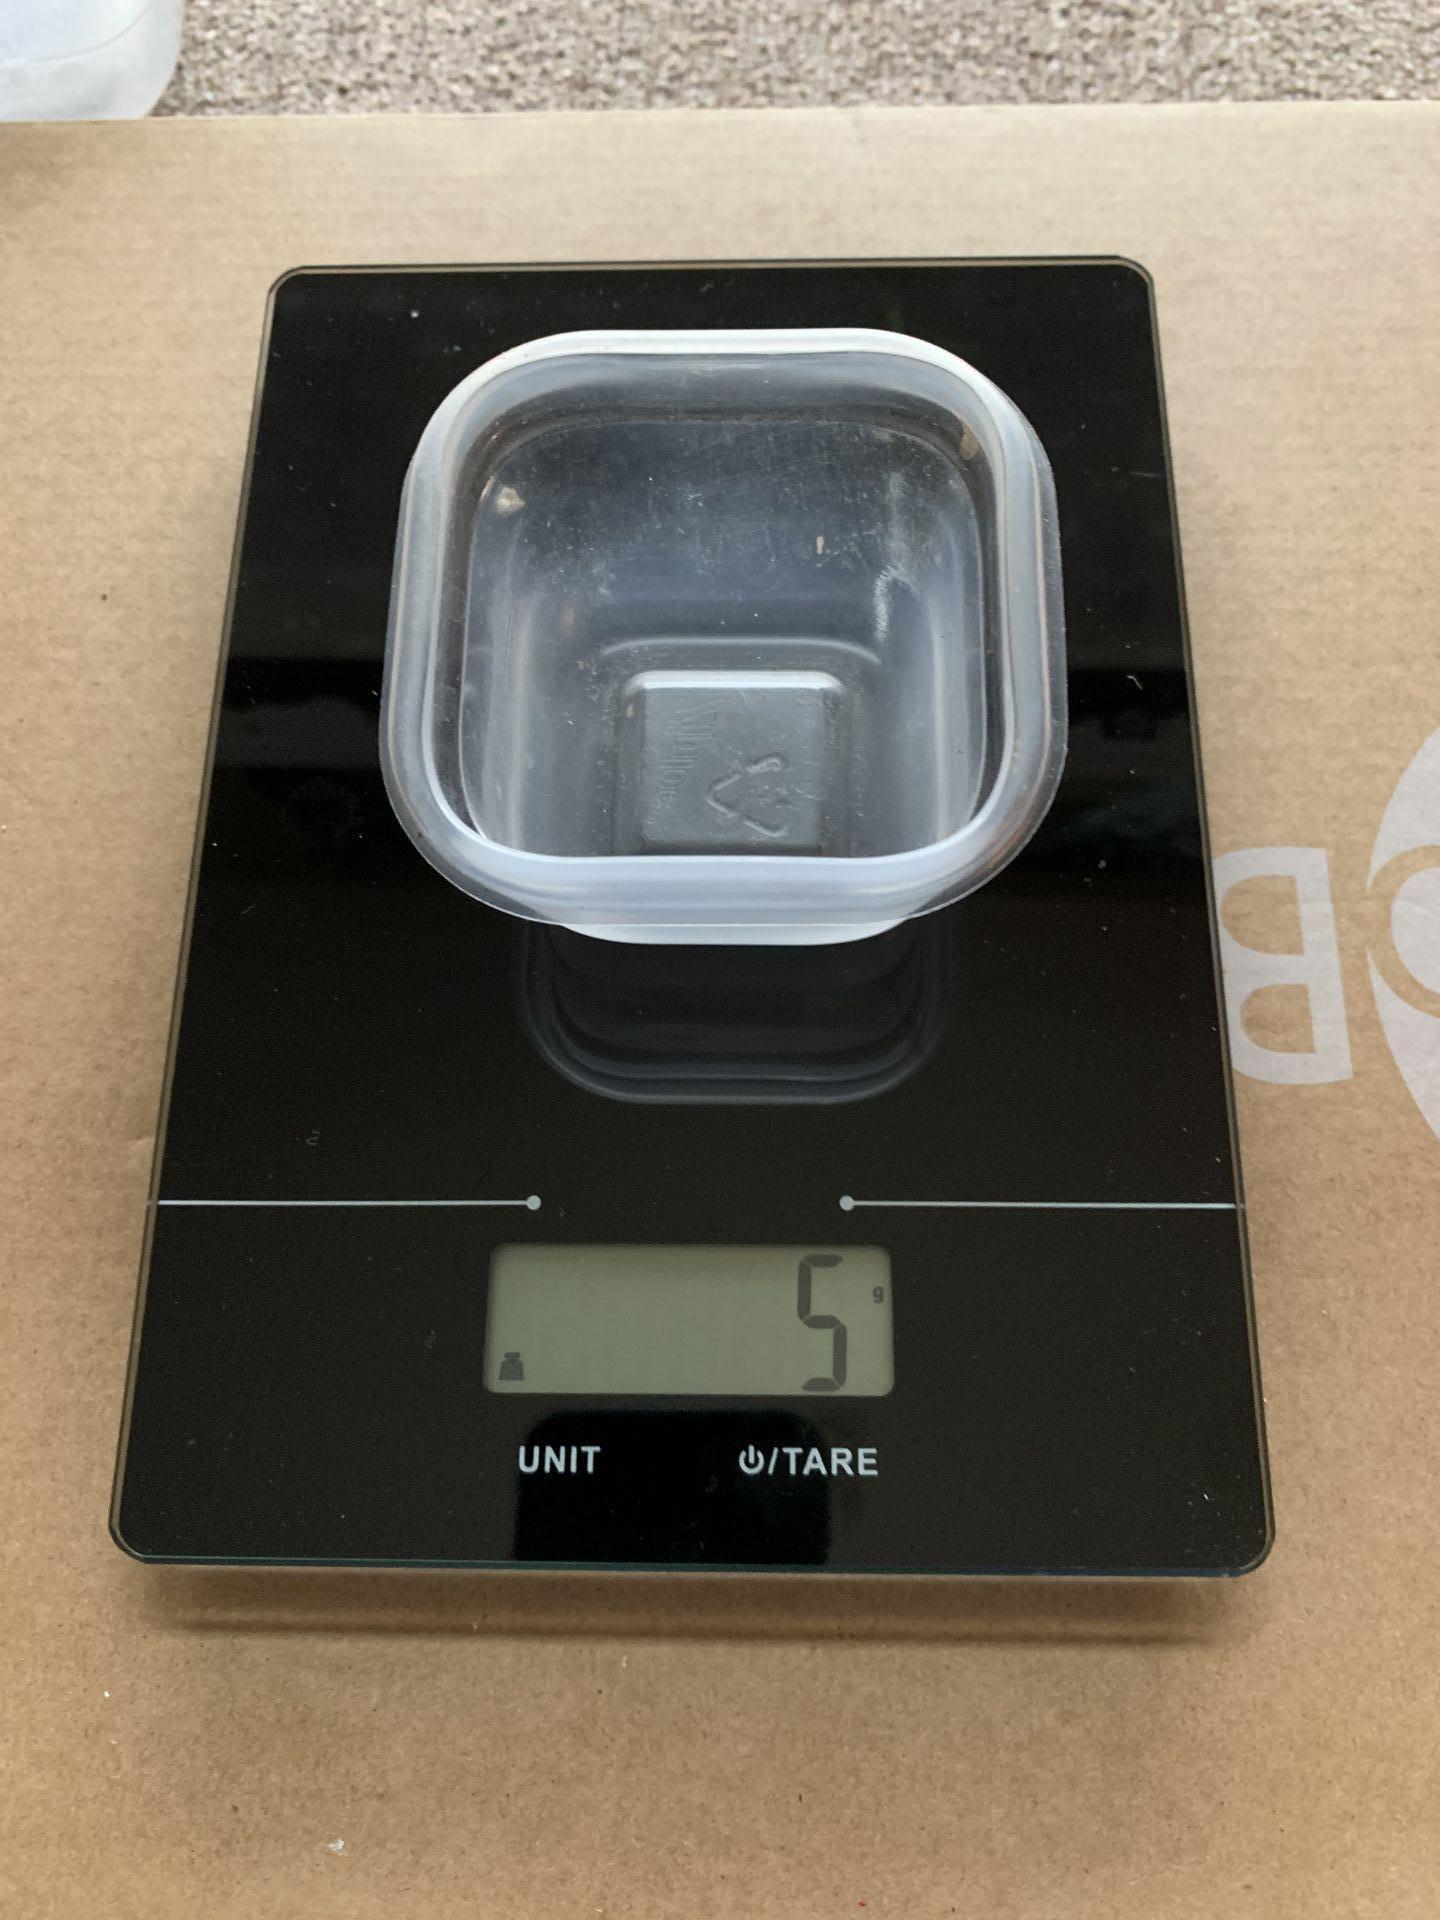 Weigh Cup at 5 grams